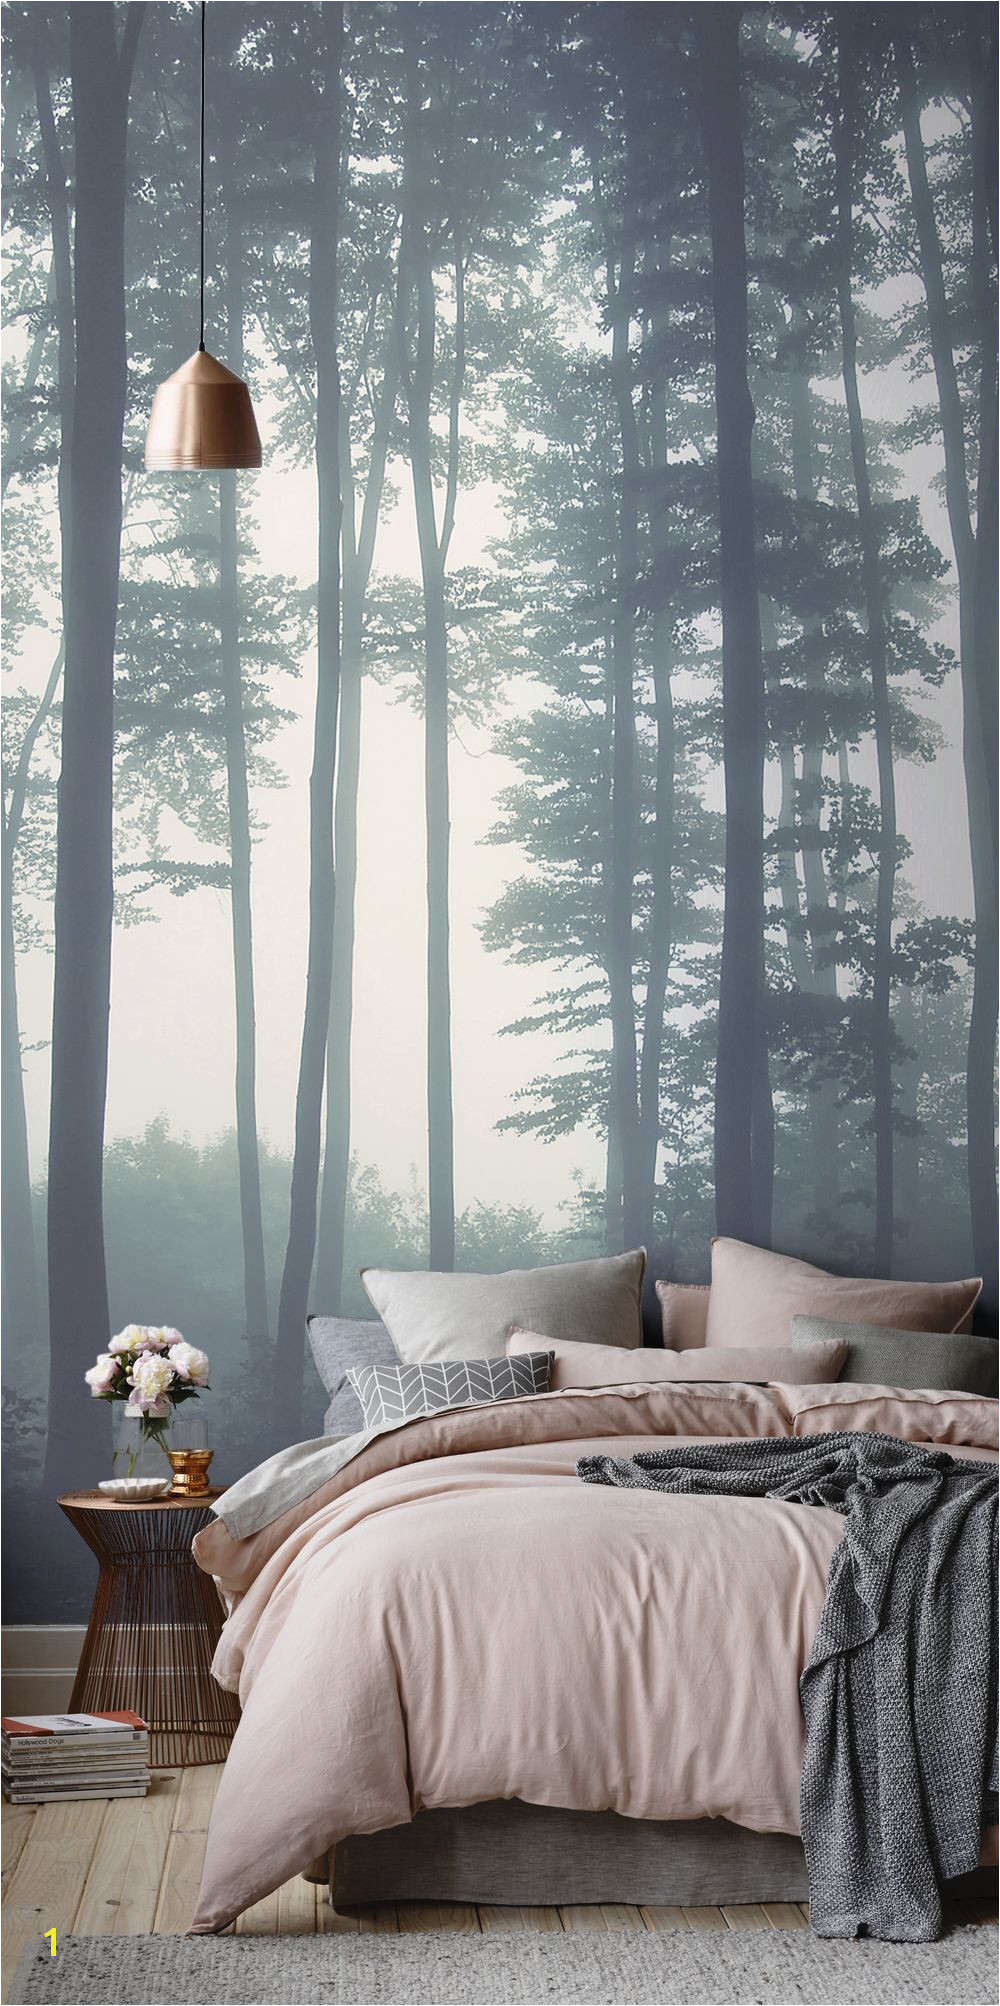 Relaxing Wall Murals Sea Of Trees forest Mural Wallpaper